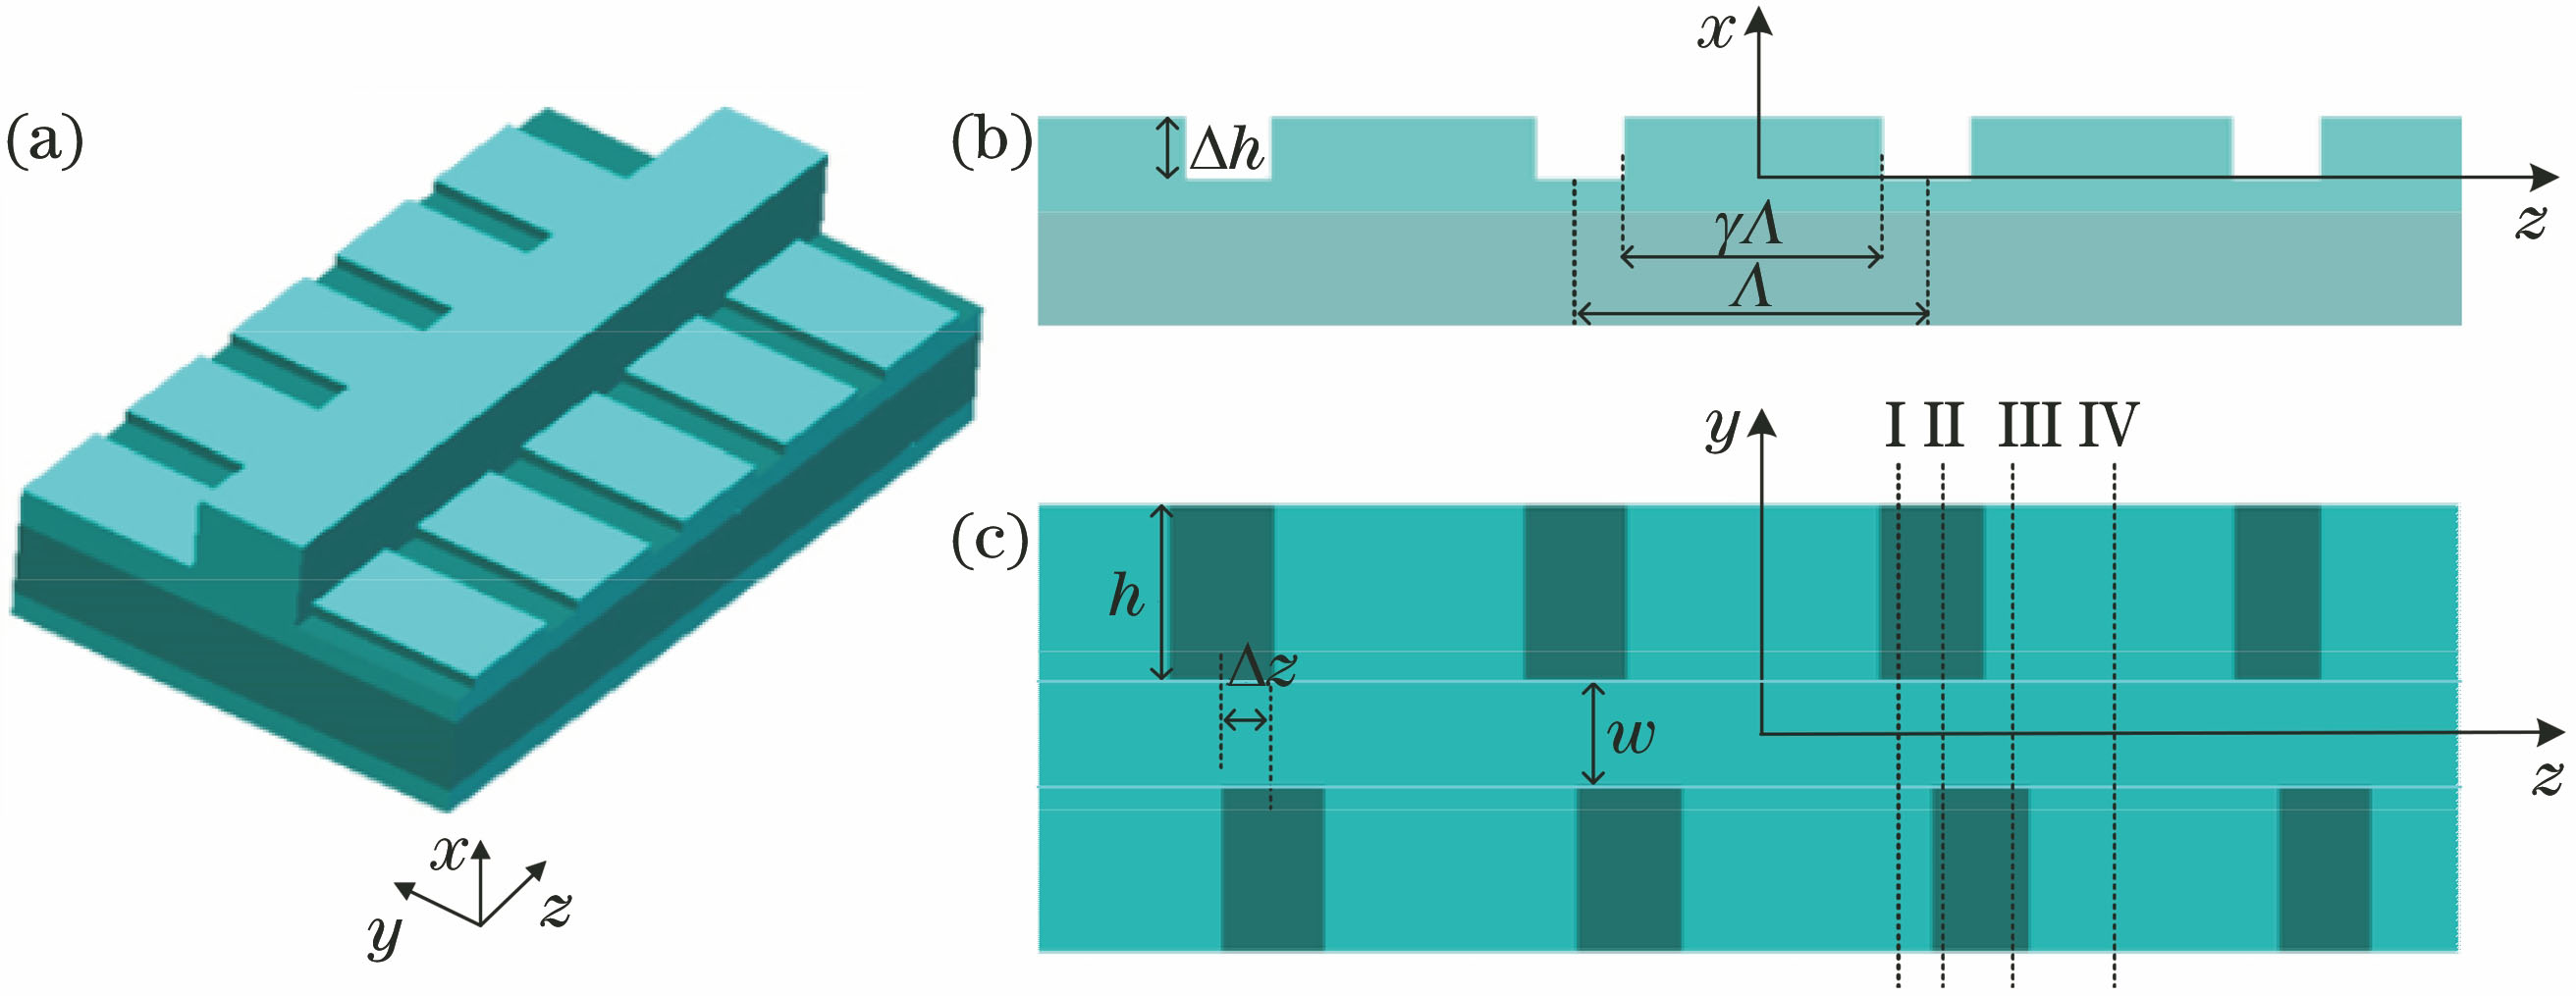 Schematic diagram of an unsynchronized coupled grating. (a) Three dimensional stereogram; (b) side view; (c) top view